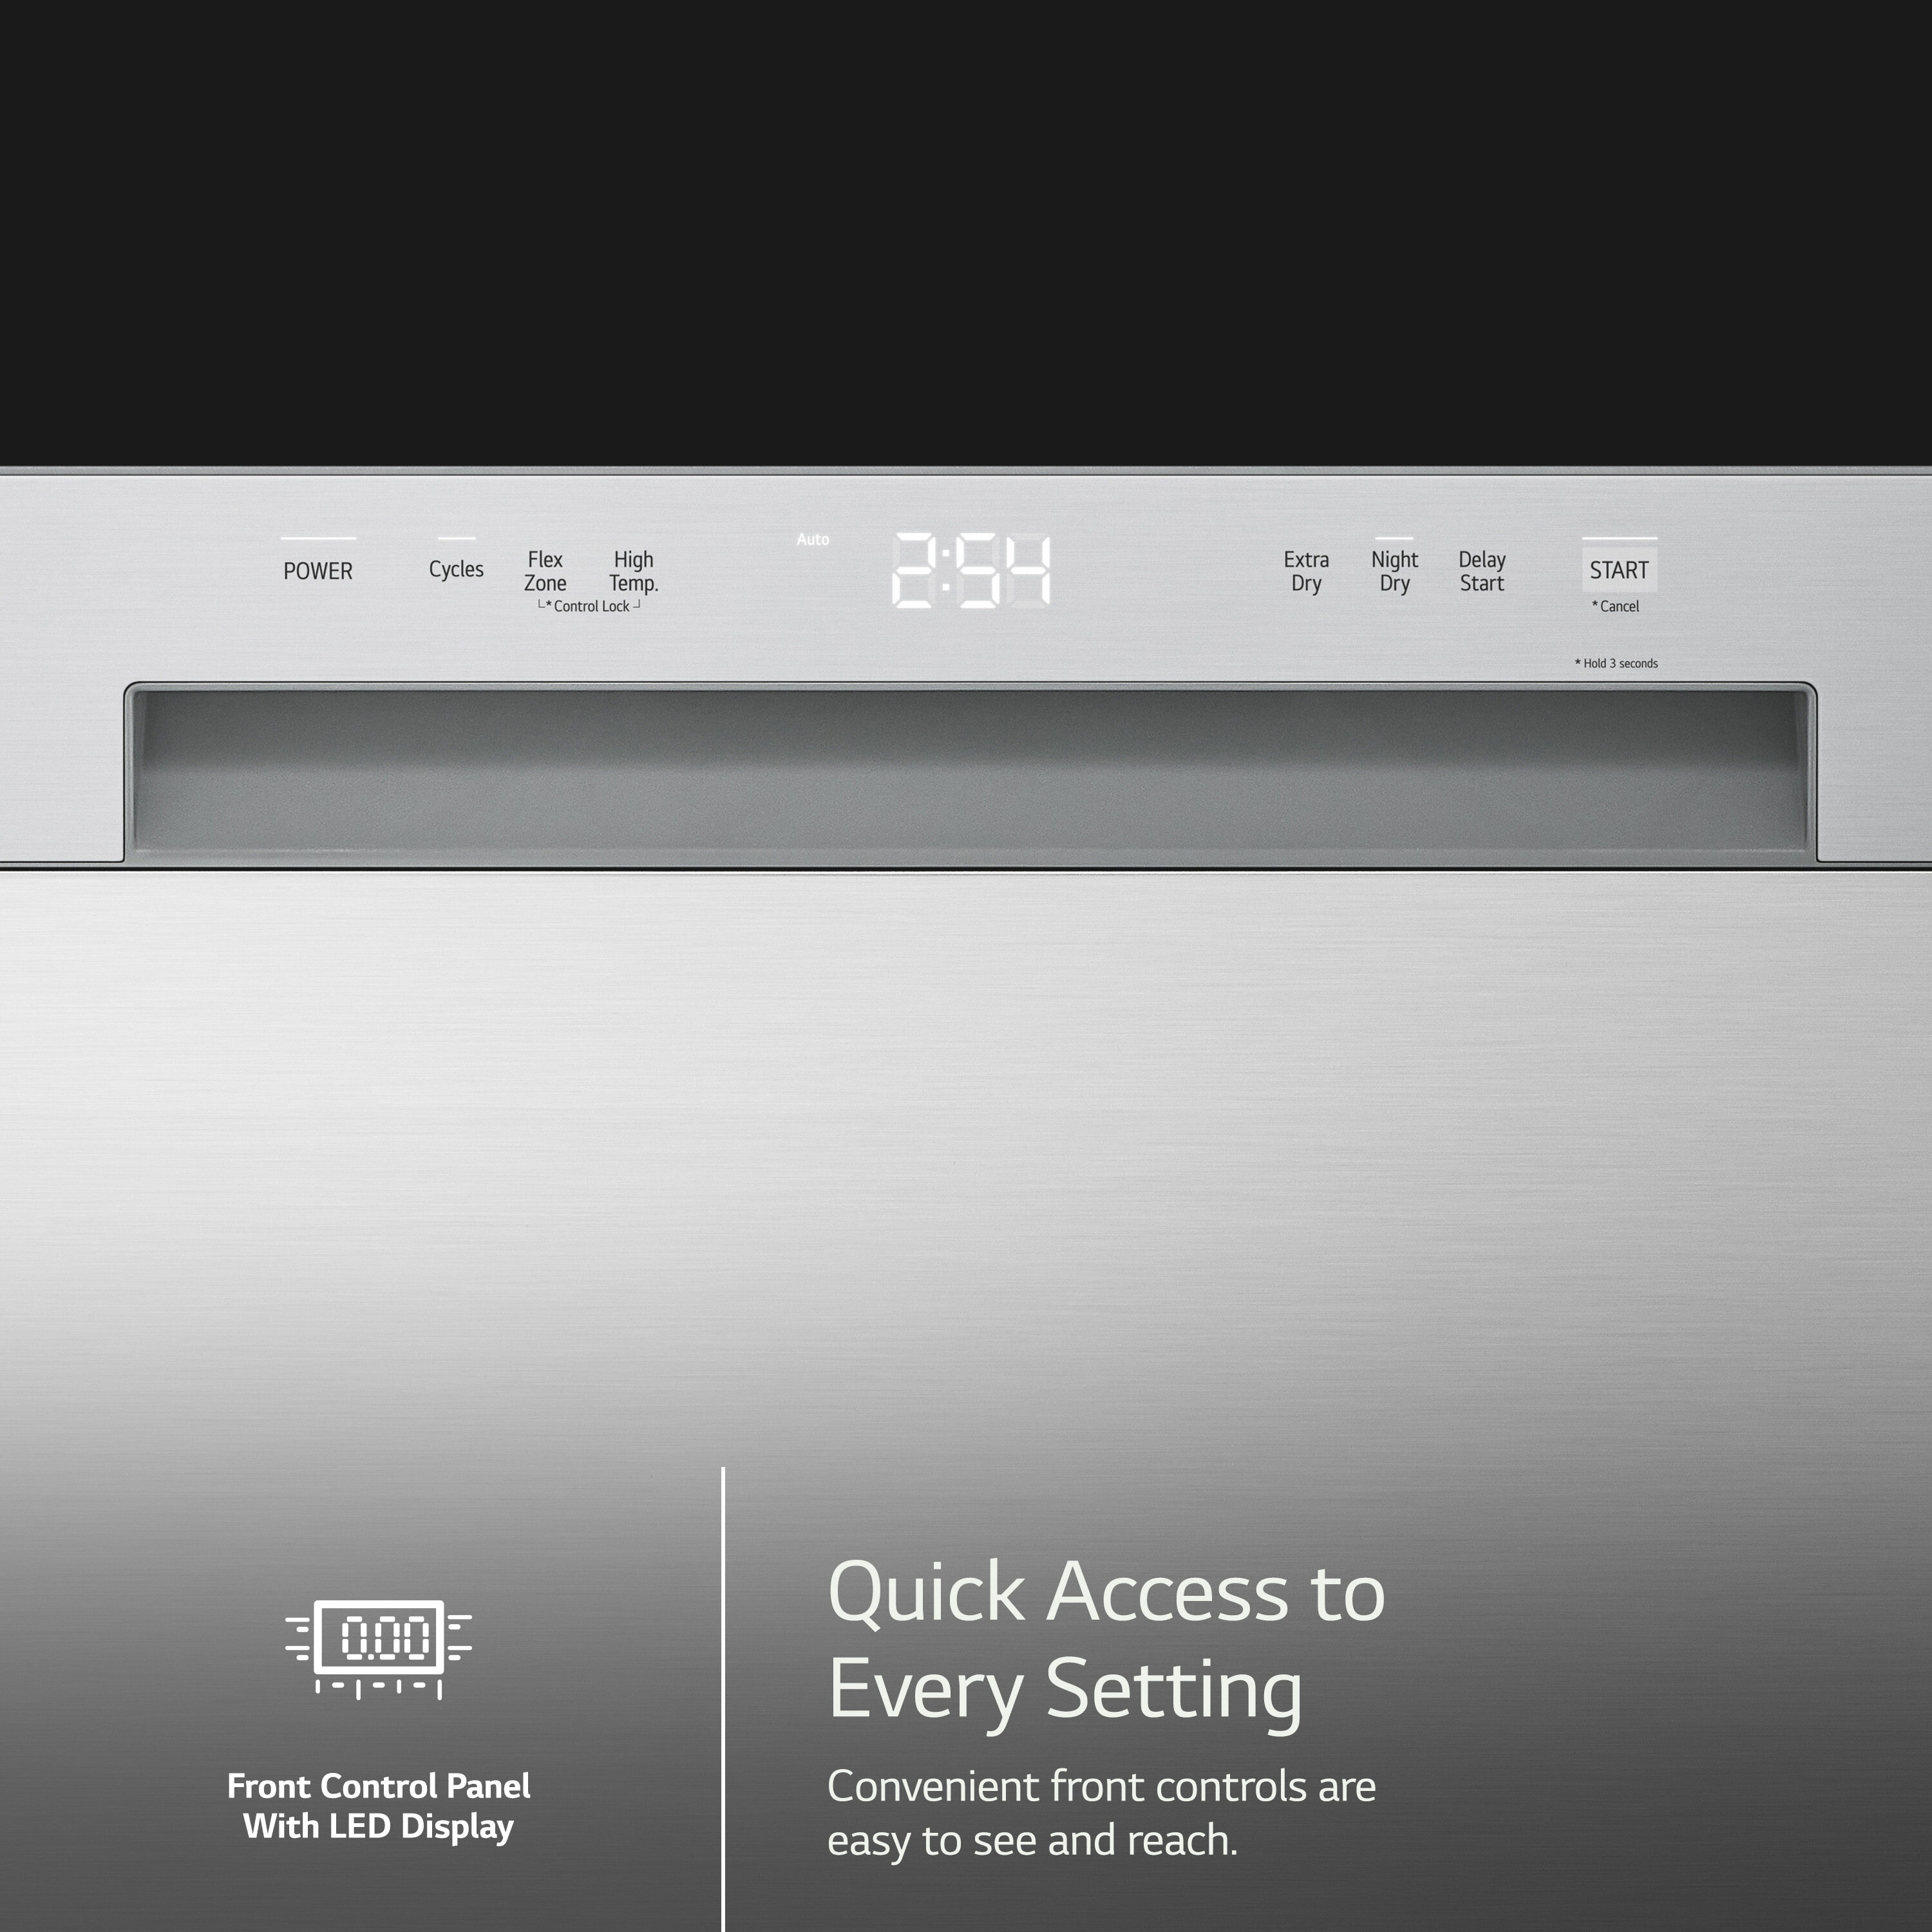 LG 24 inch Full Console Dishwasher with 15 Place Settings, Front Controls - White